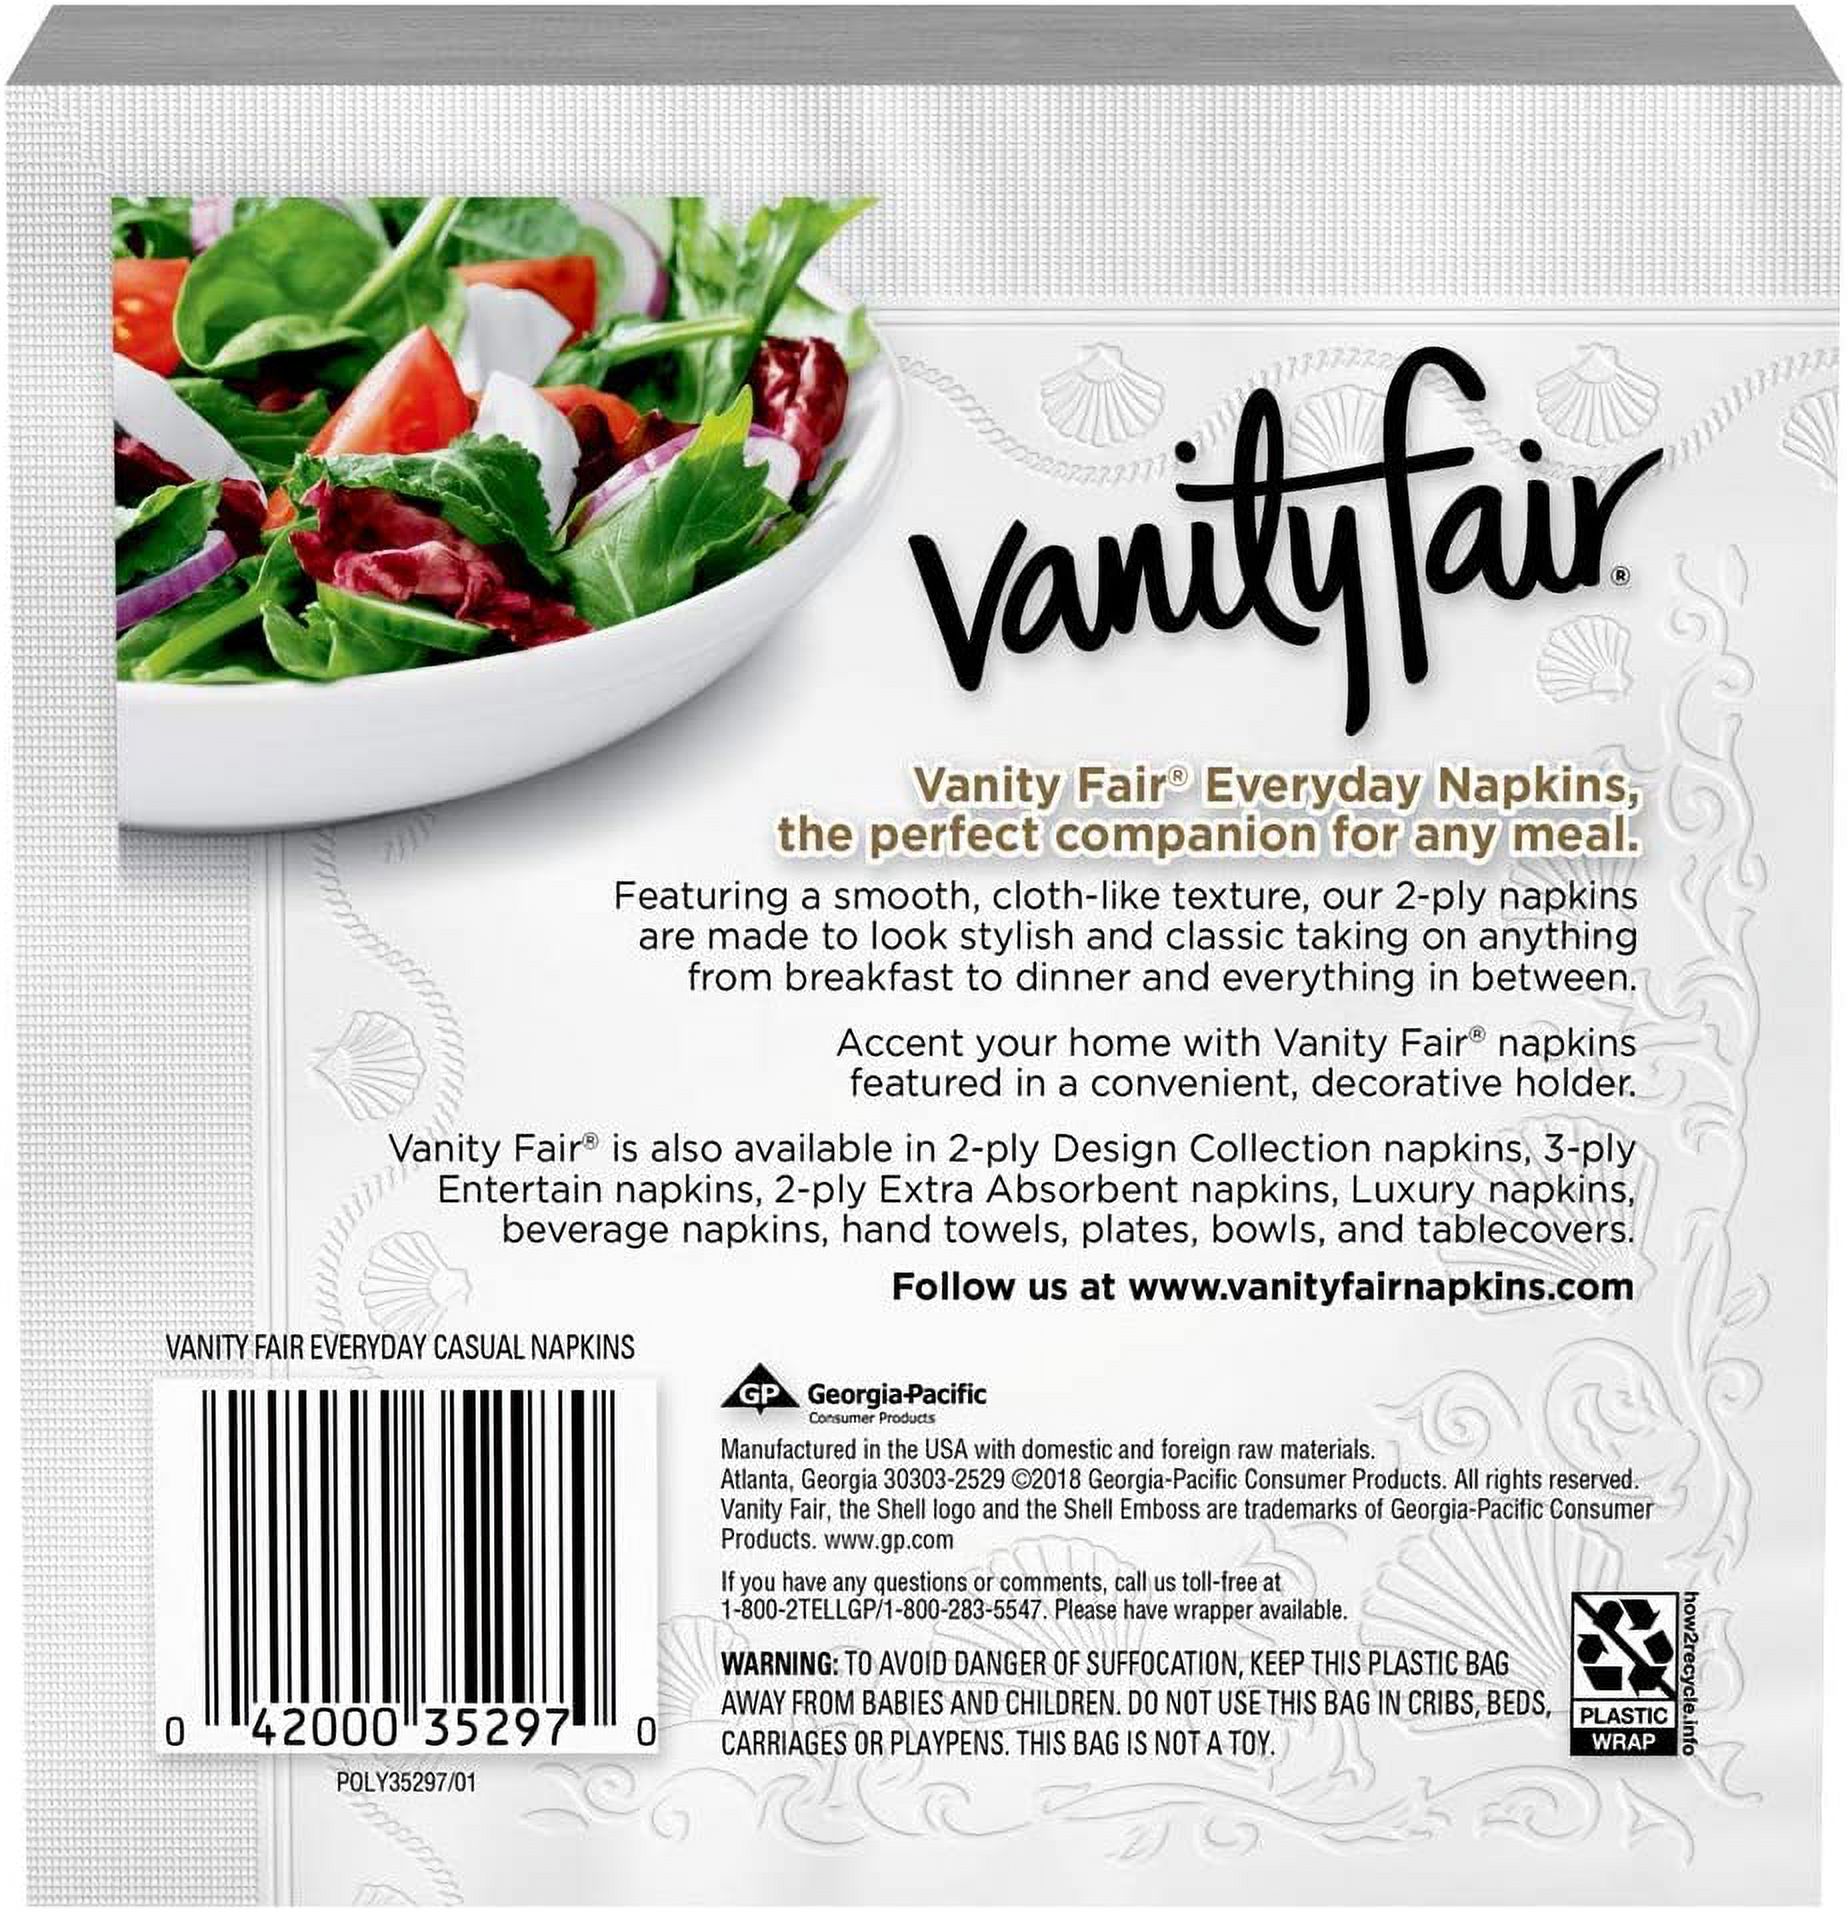 Vanity Fair Everyday Disposable Paper Napkins, White, 100 Count - image 14 of 14